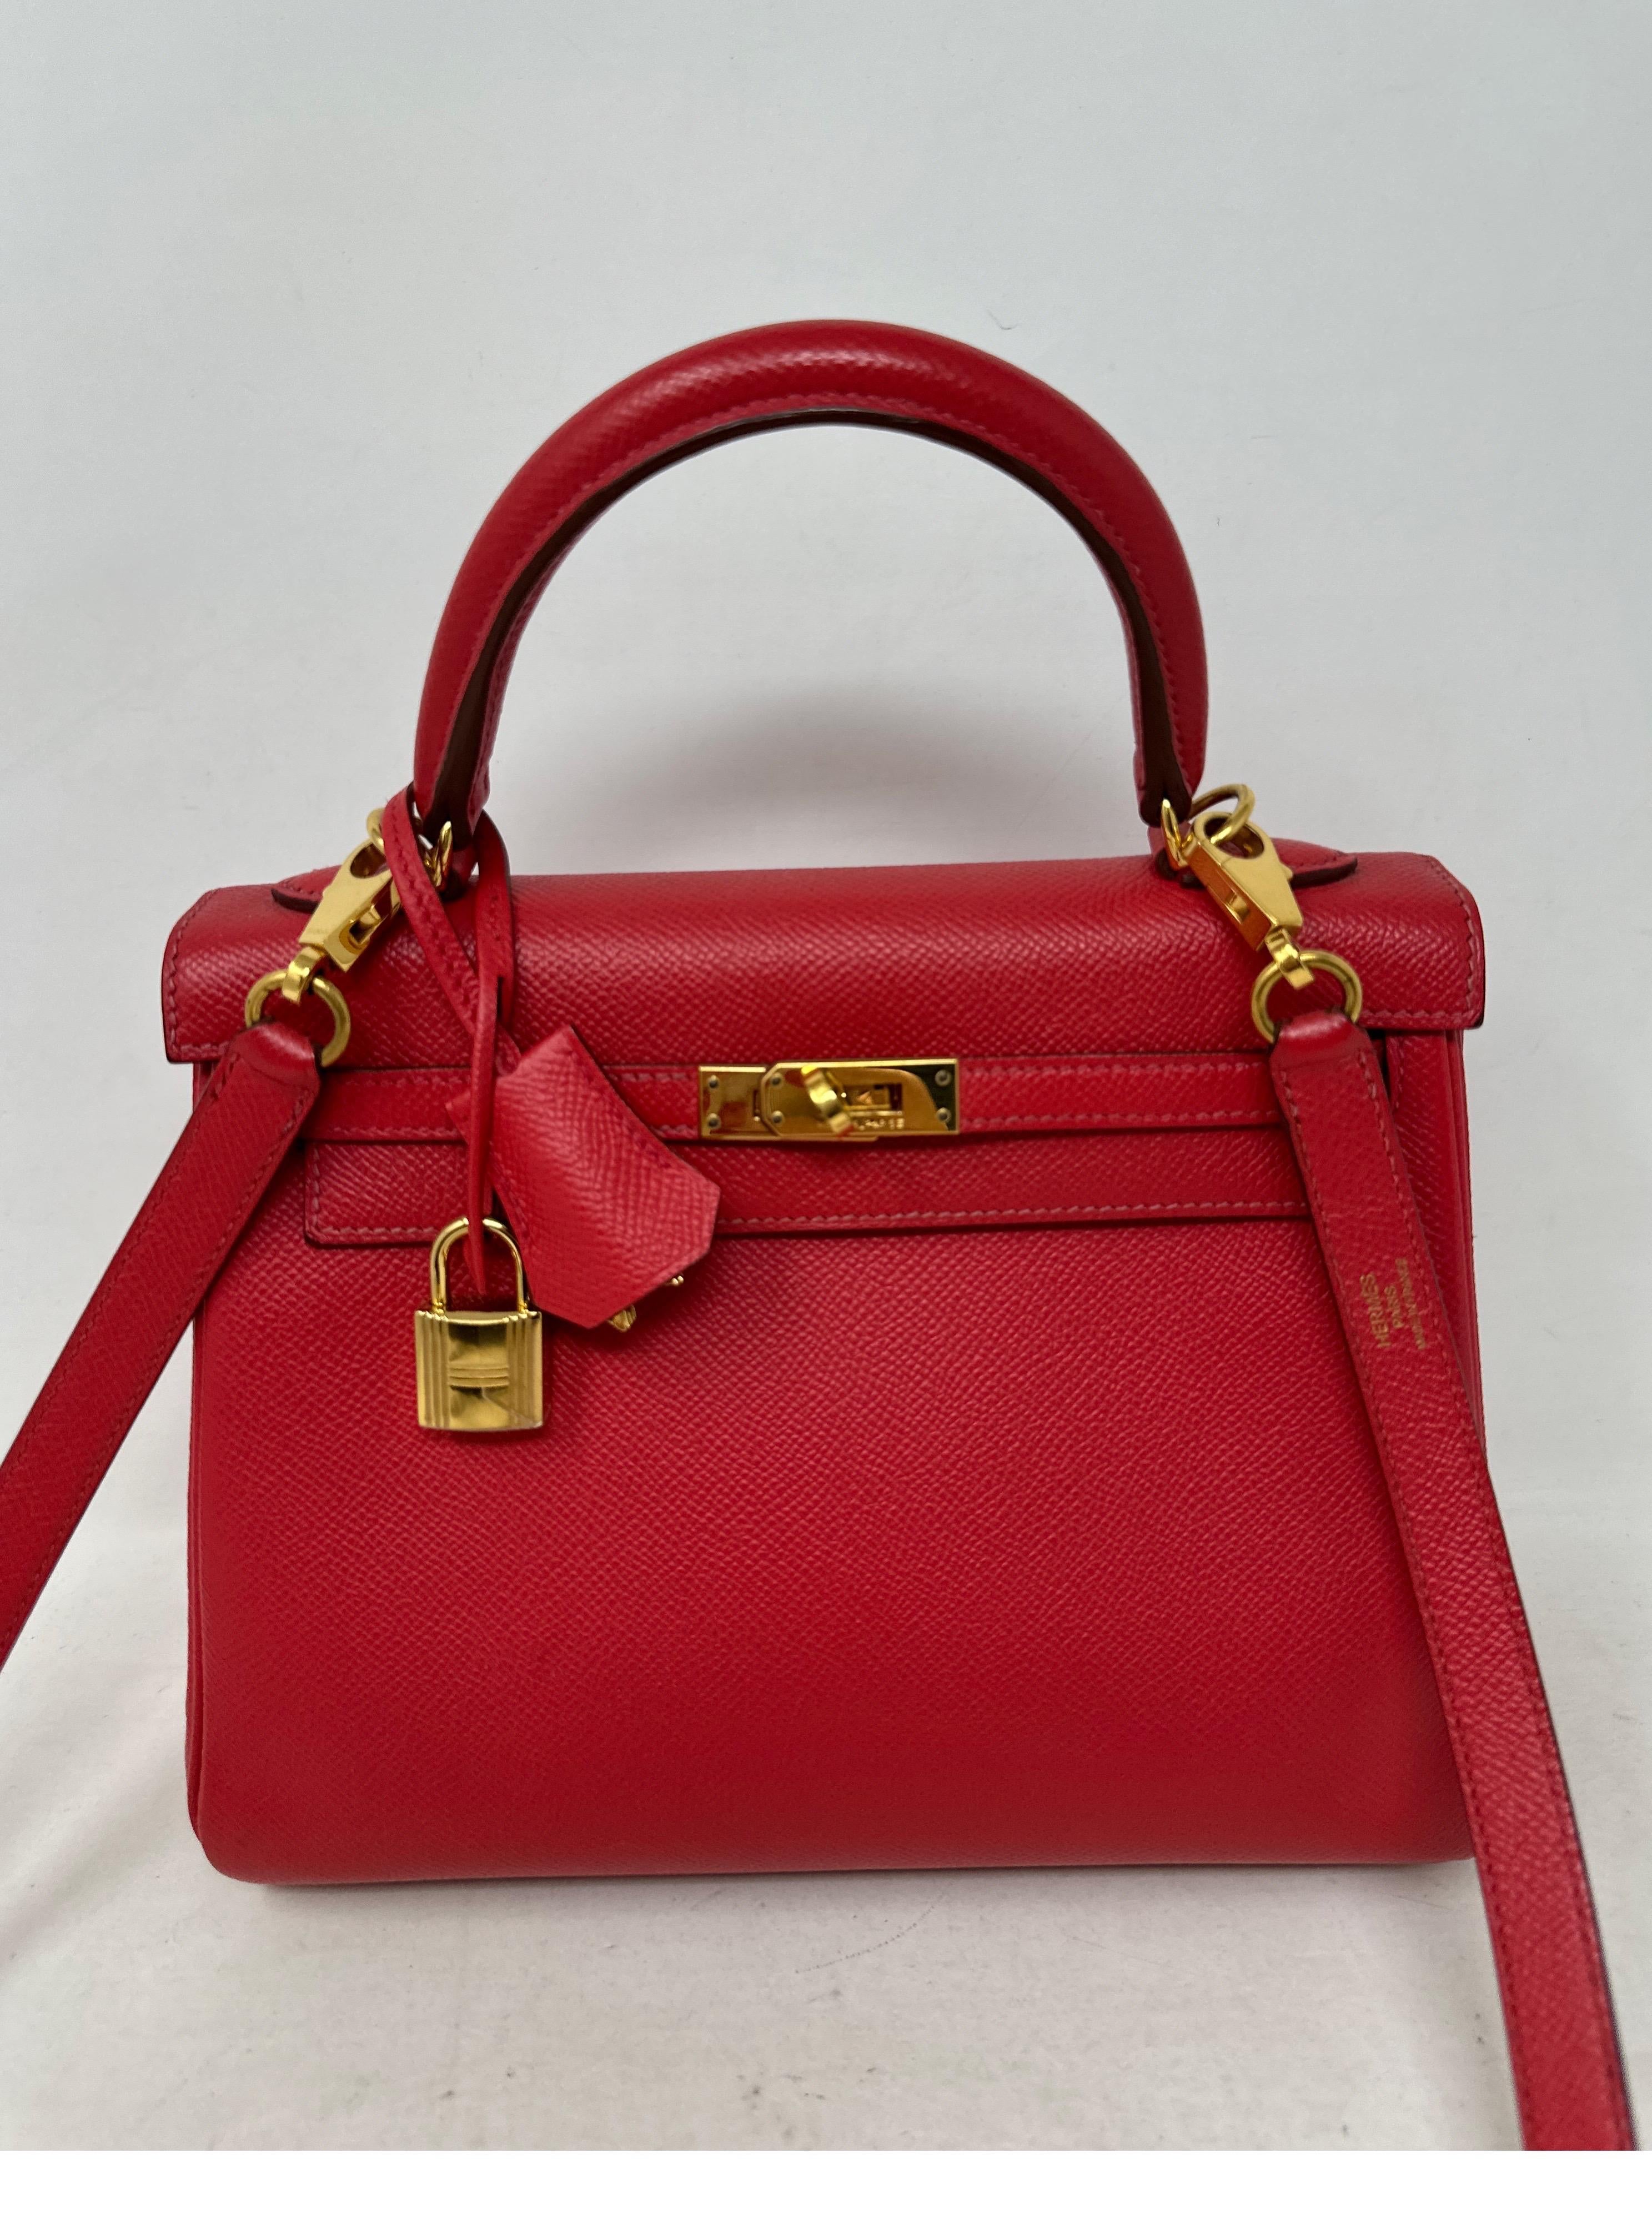 Hermes Red Birkin 25 Bag. Rare small size 25 Kelly.  Epsom leather with gold hardware. Interior clean. Good condition. Collector's piece. Great evening bag or everyday. Includes clochette, lock, keys, and dust bag. Guaranteed authentic. 